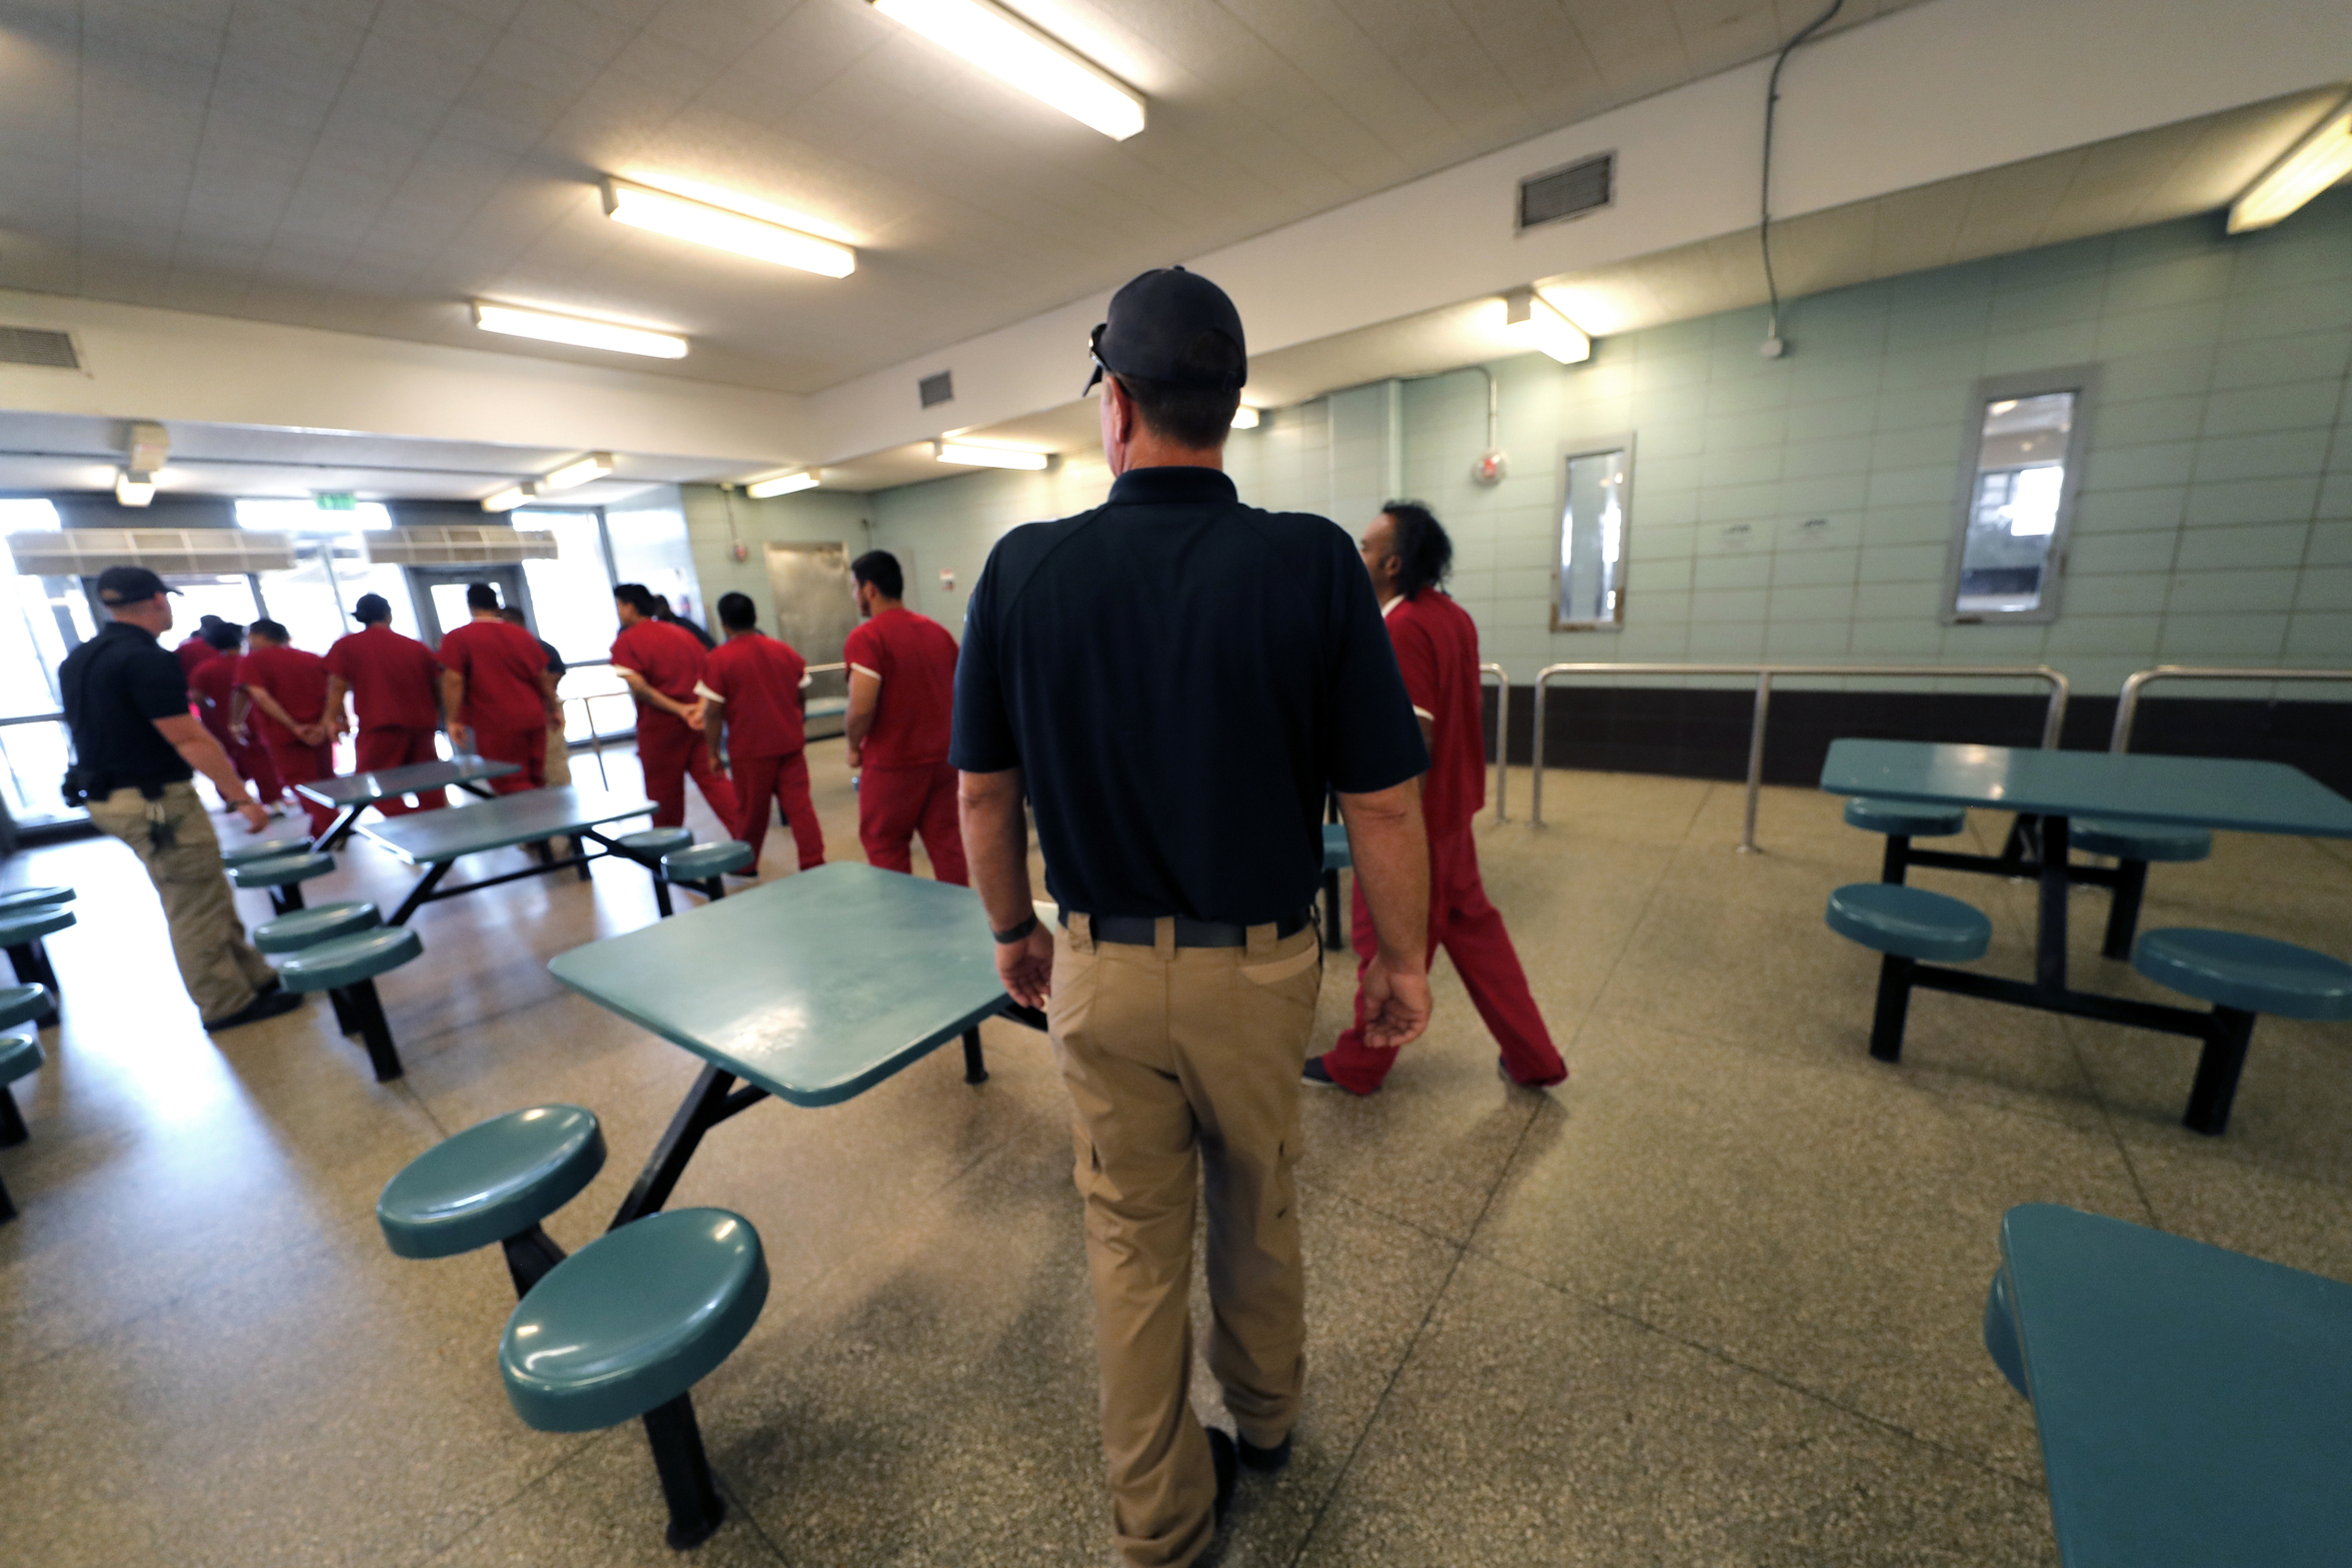 PHOTO: Detainees leave the cafeteria under the watch of guards during a media tour at the Winn Correctional Center in Winnfield, La., Sept. 26, 2019.